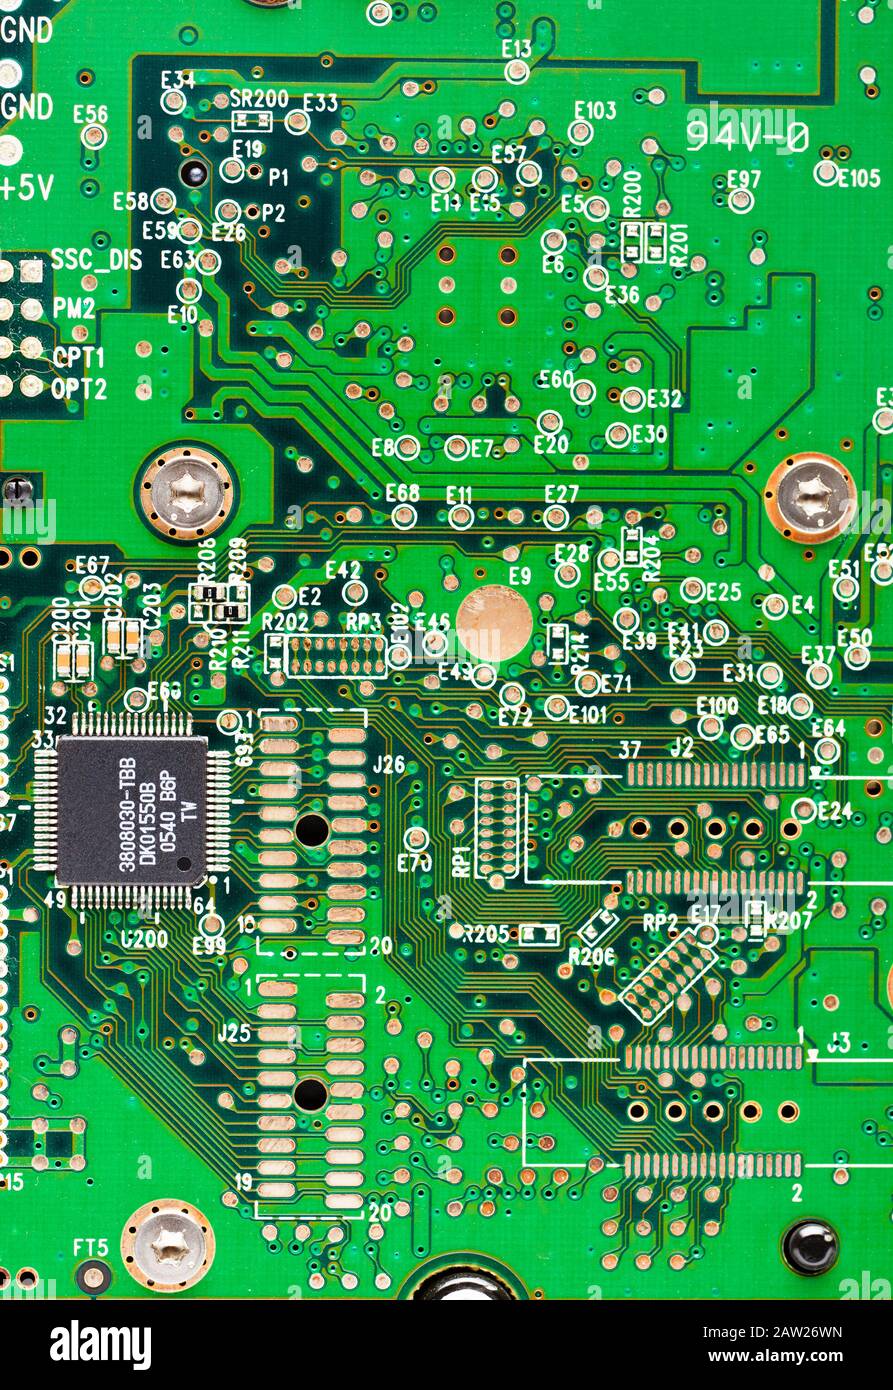 https://c8.alamy.com/comp/2AW26WN/technology-printed-circuit-board-pcb-and-computer-chips-2AW26WN.jpg